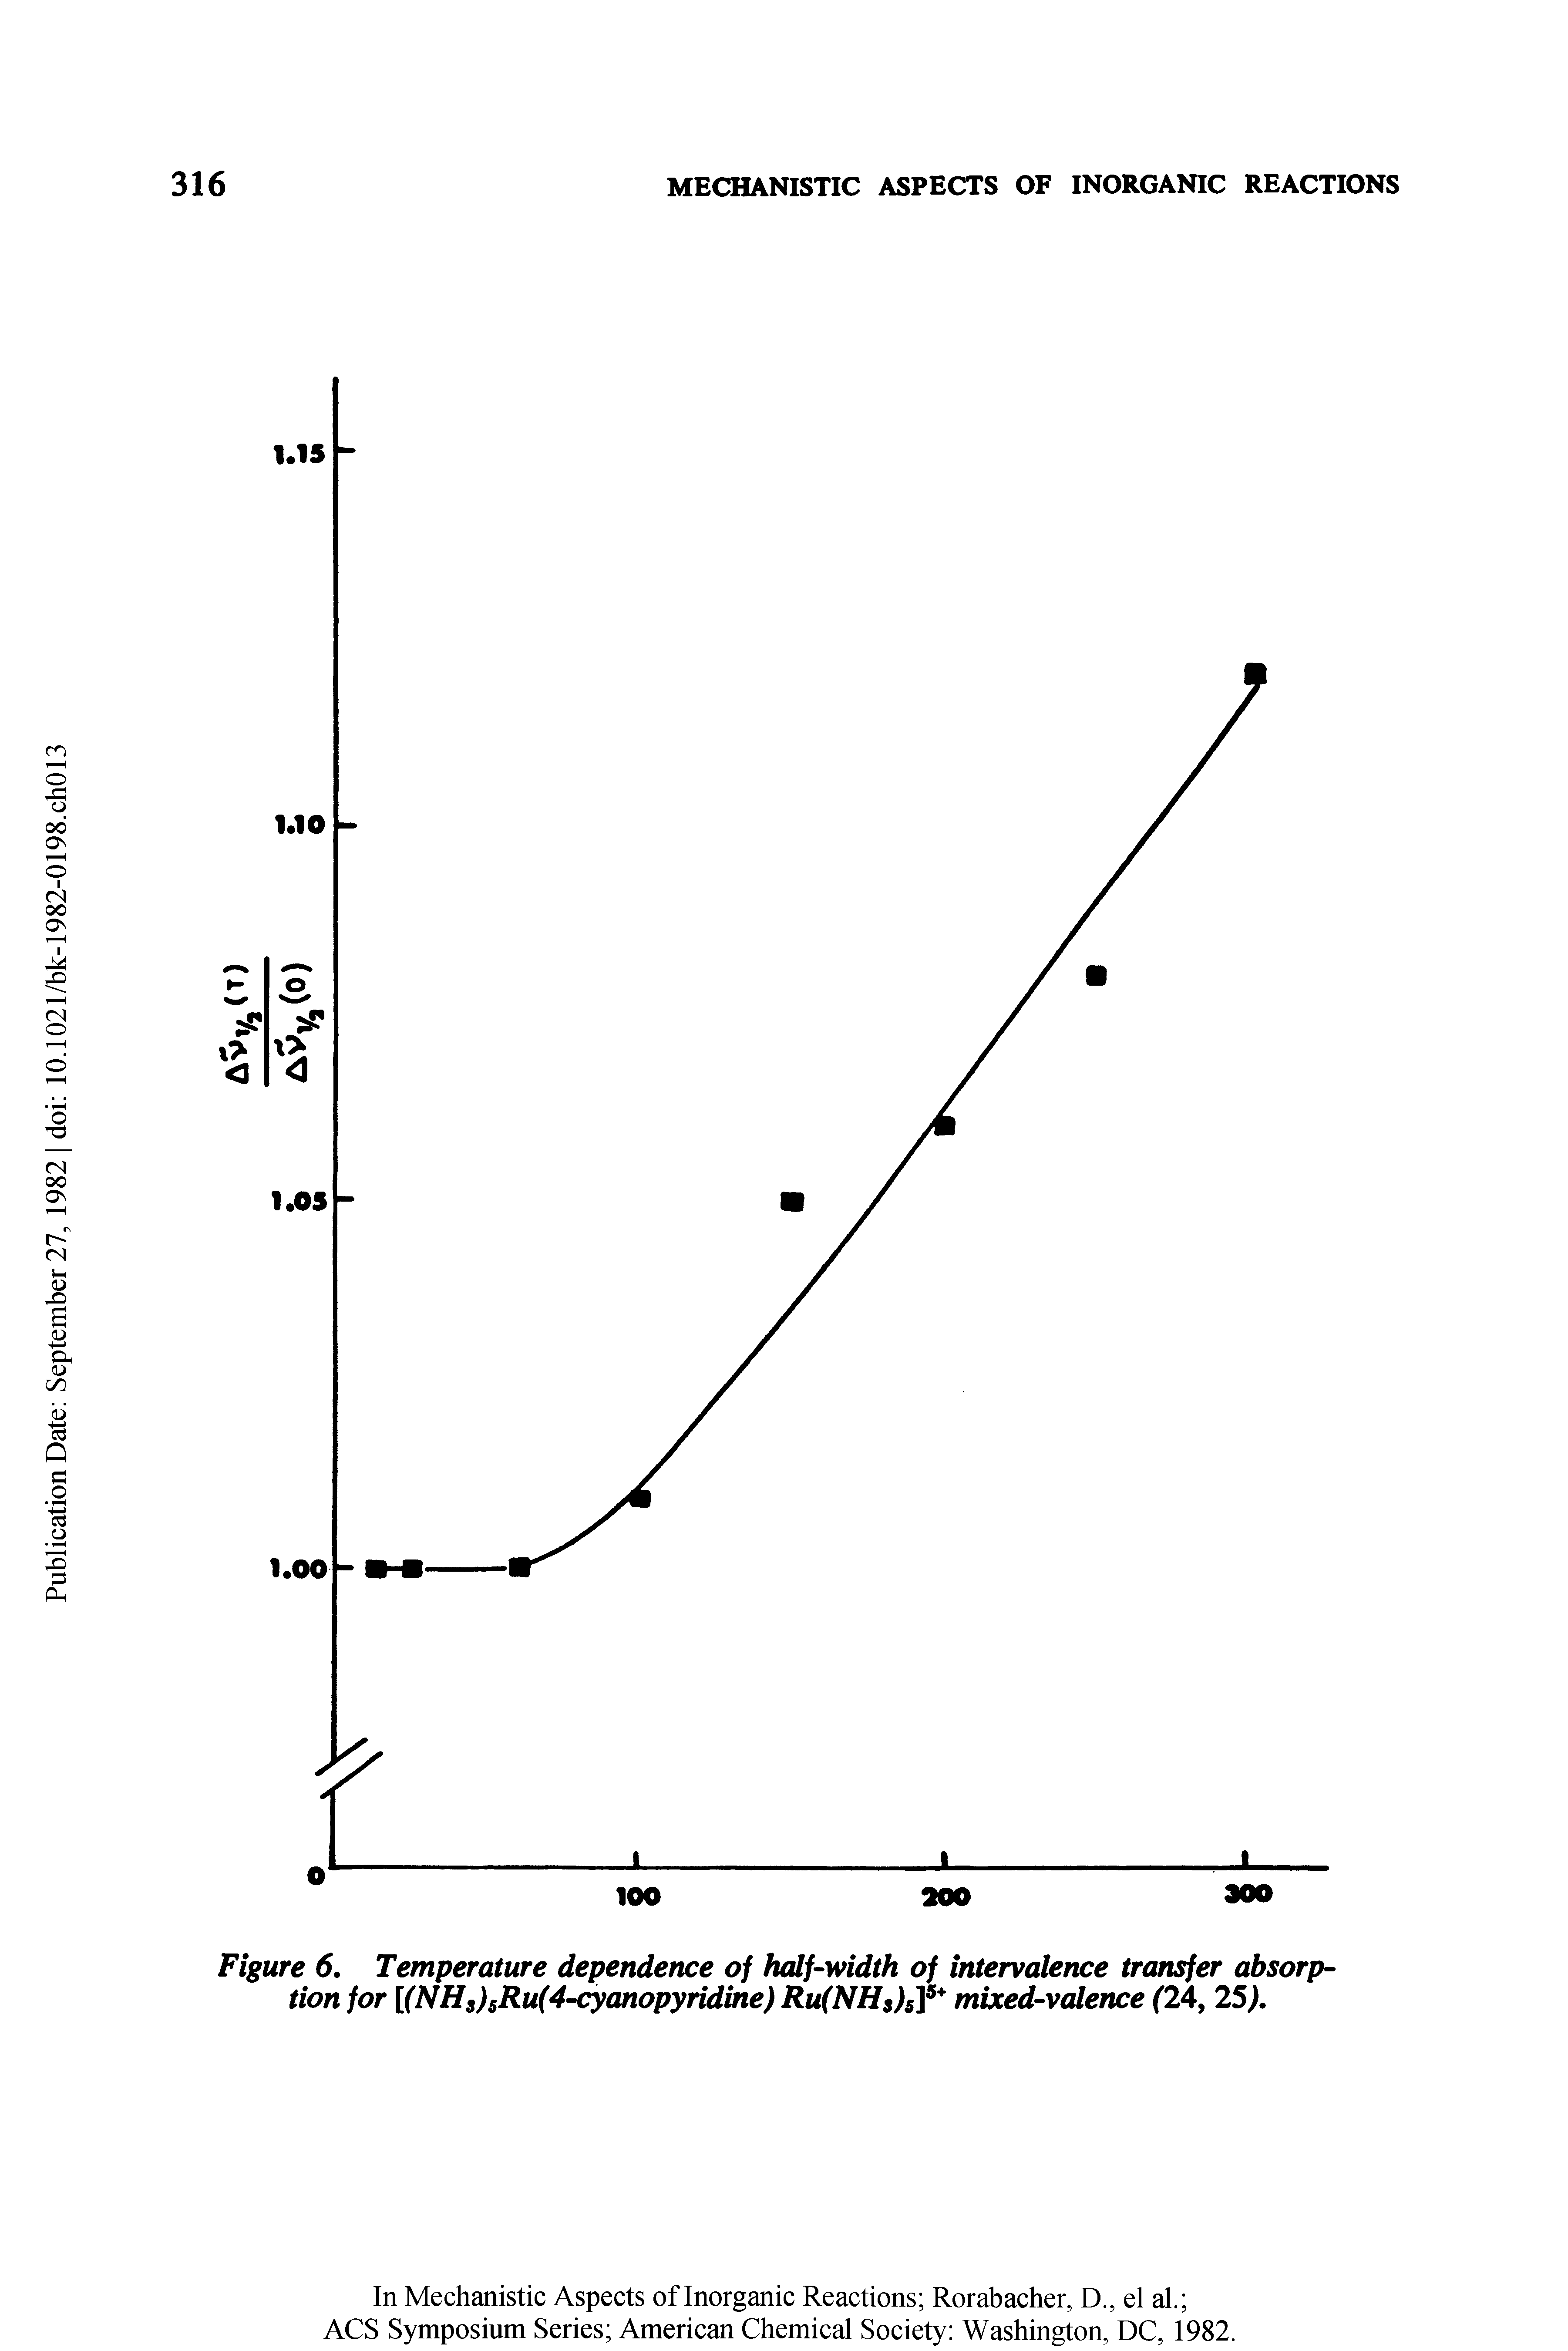 Figure 6. Temperature dependence of half-width of intervalence transfer absorption for [(NHS)sRu(4-cyanopyridine) Ru(NHs)5]5 mixed-valence (24, 25).